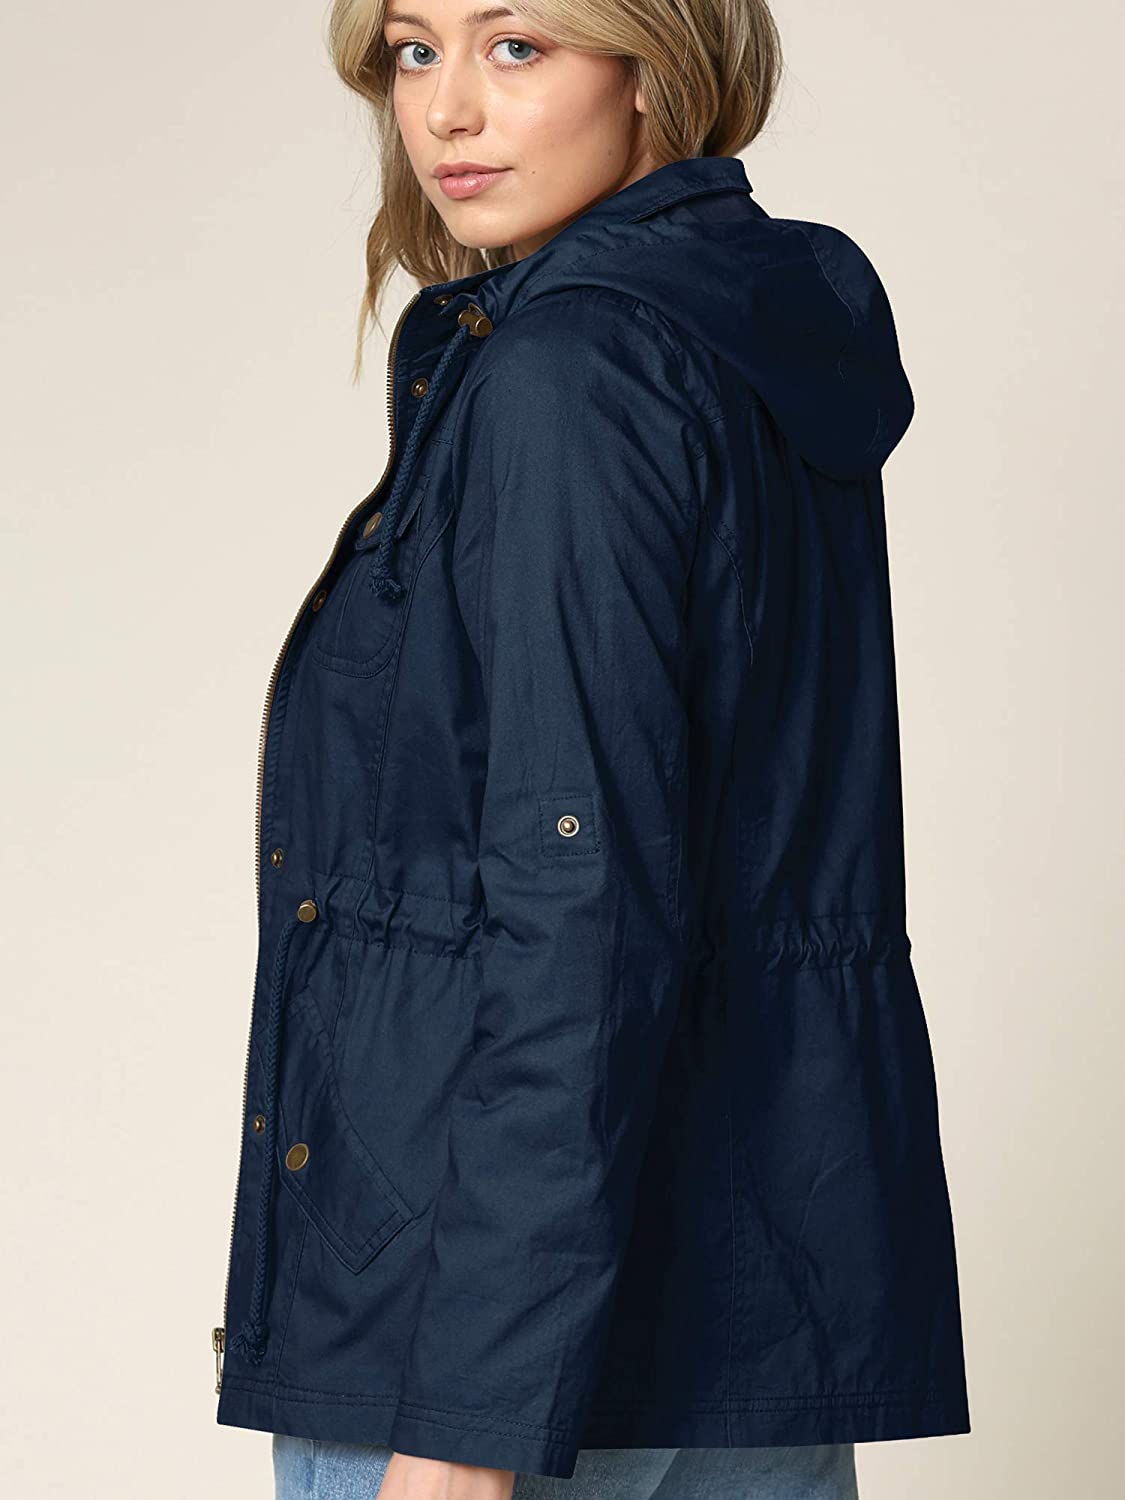 Lock and Love LL Womens Casual Military Safari Anorak Jacket with Hoodie